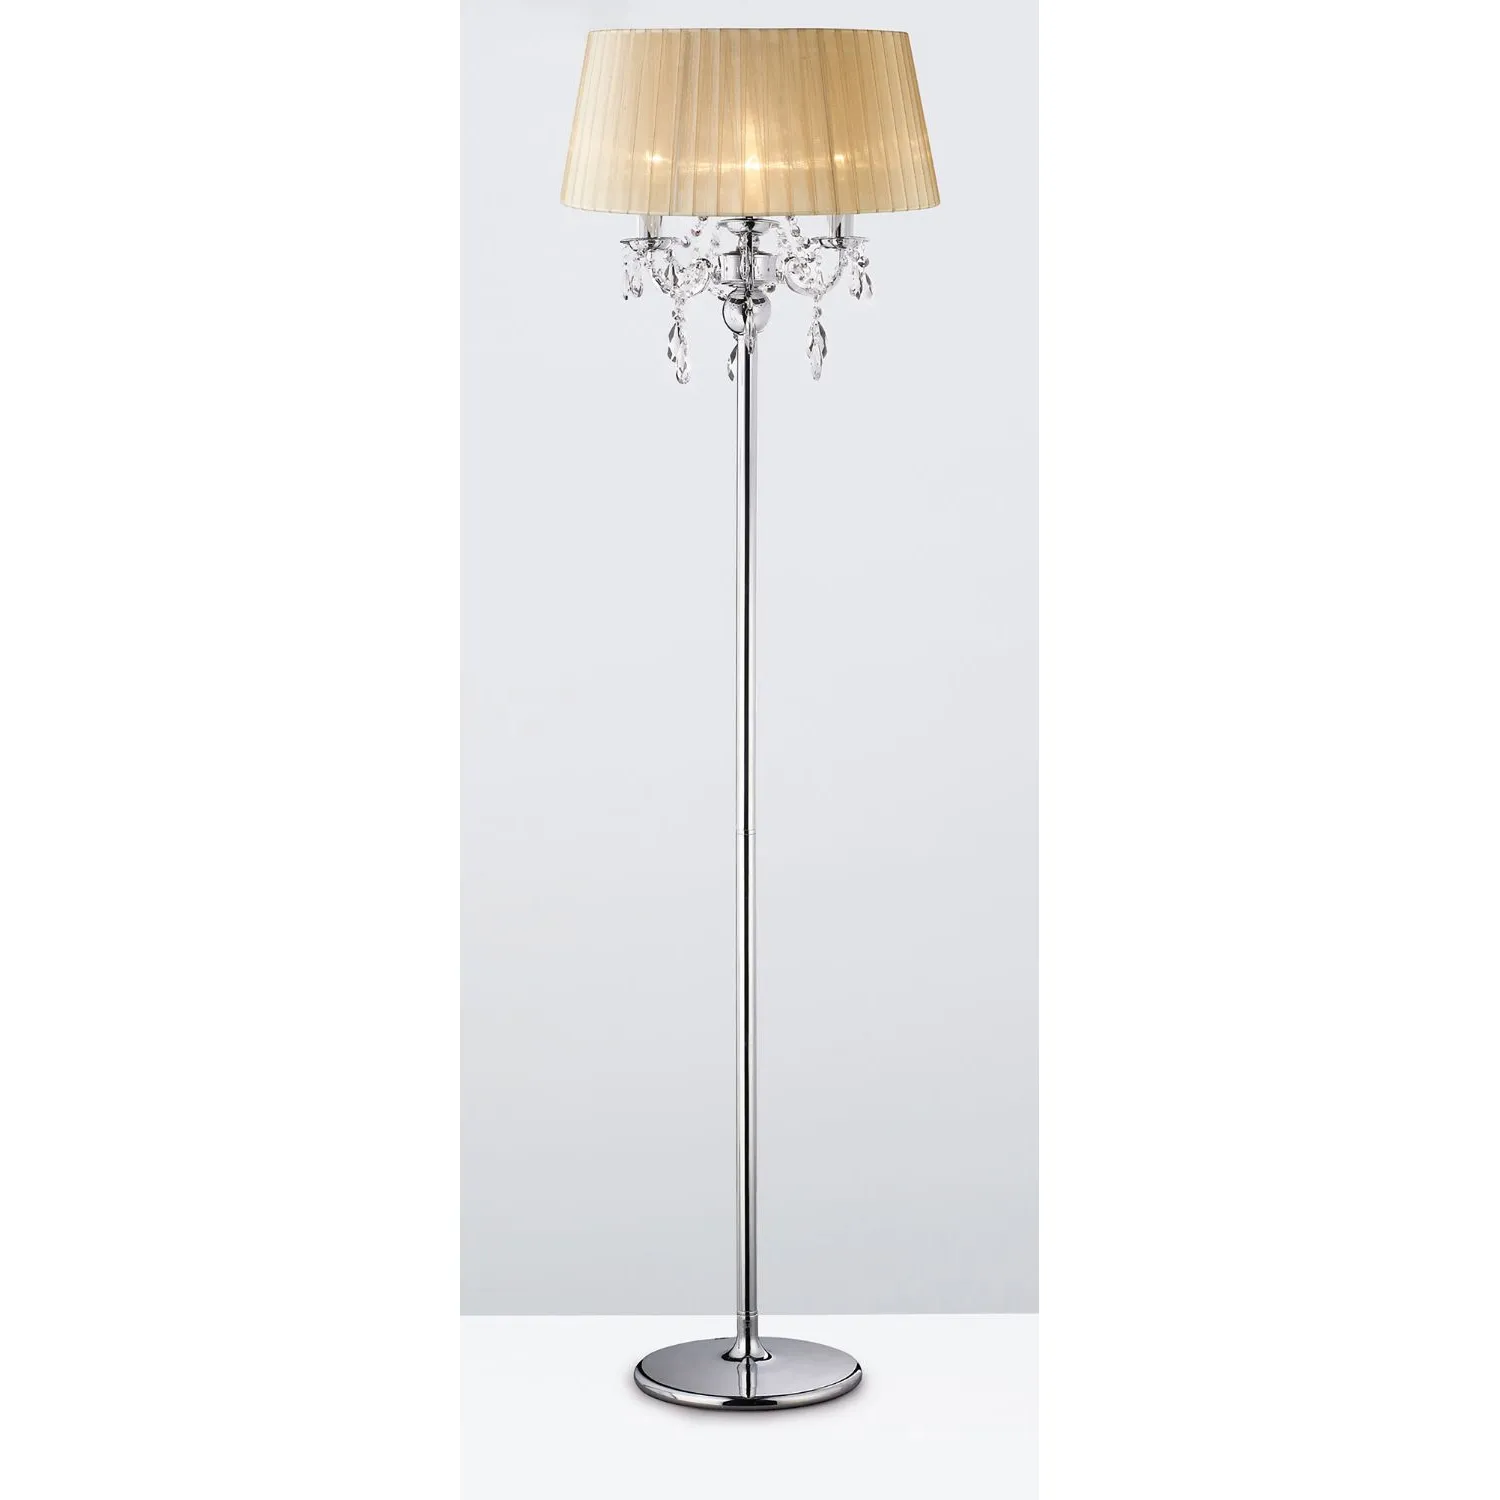 Olivia Floor Lamp With Soft Bronze Shade 3 Light E14 Polished Chrome Crystal, NOT LED CFL Compatible